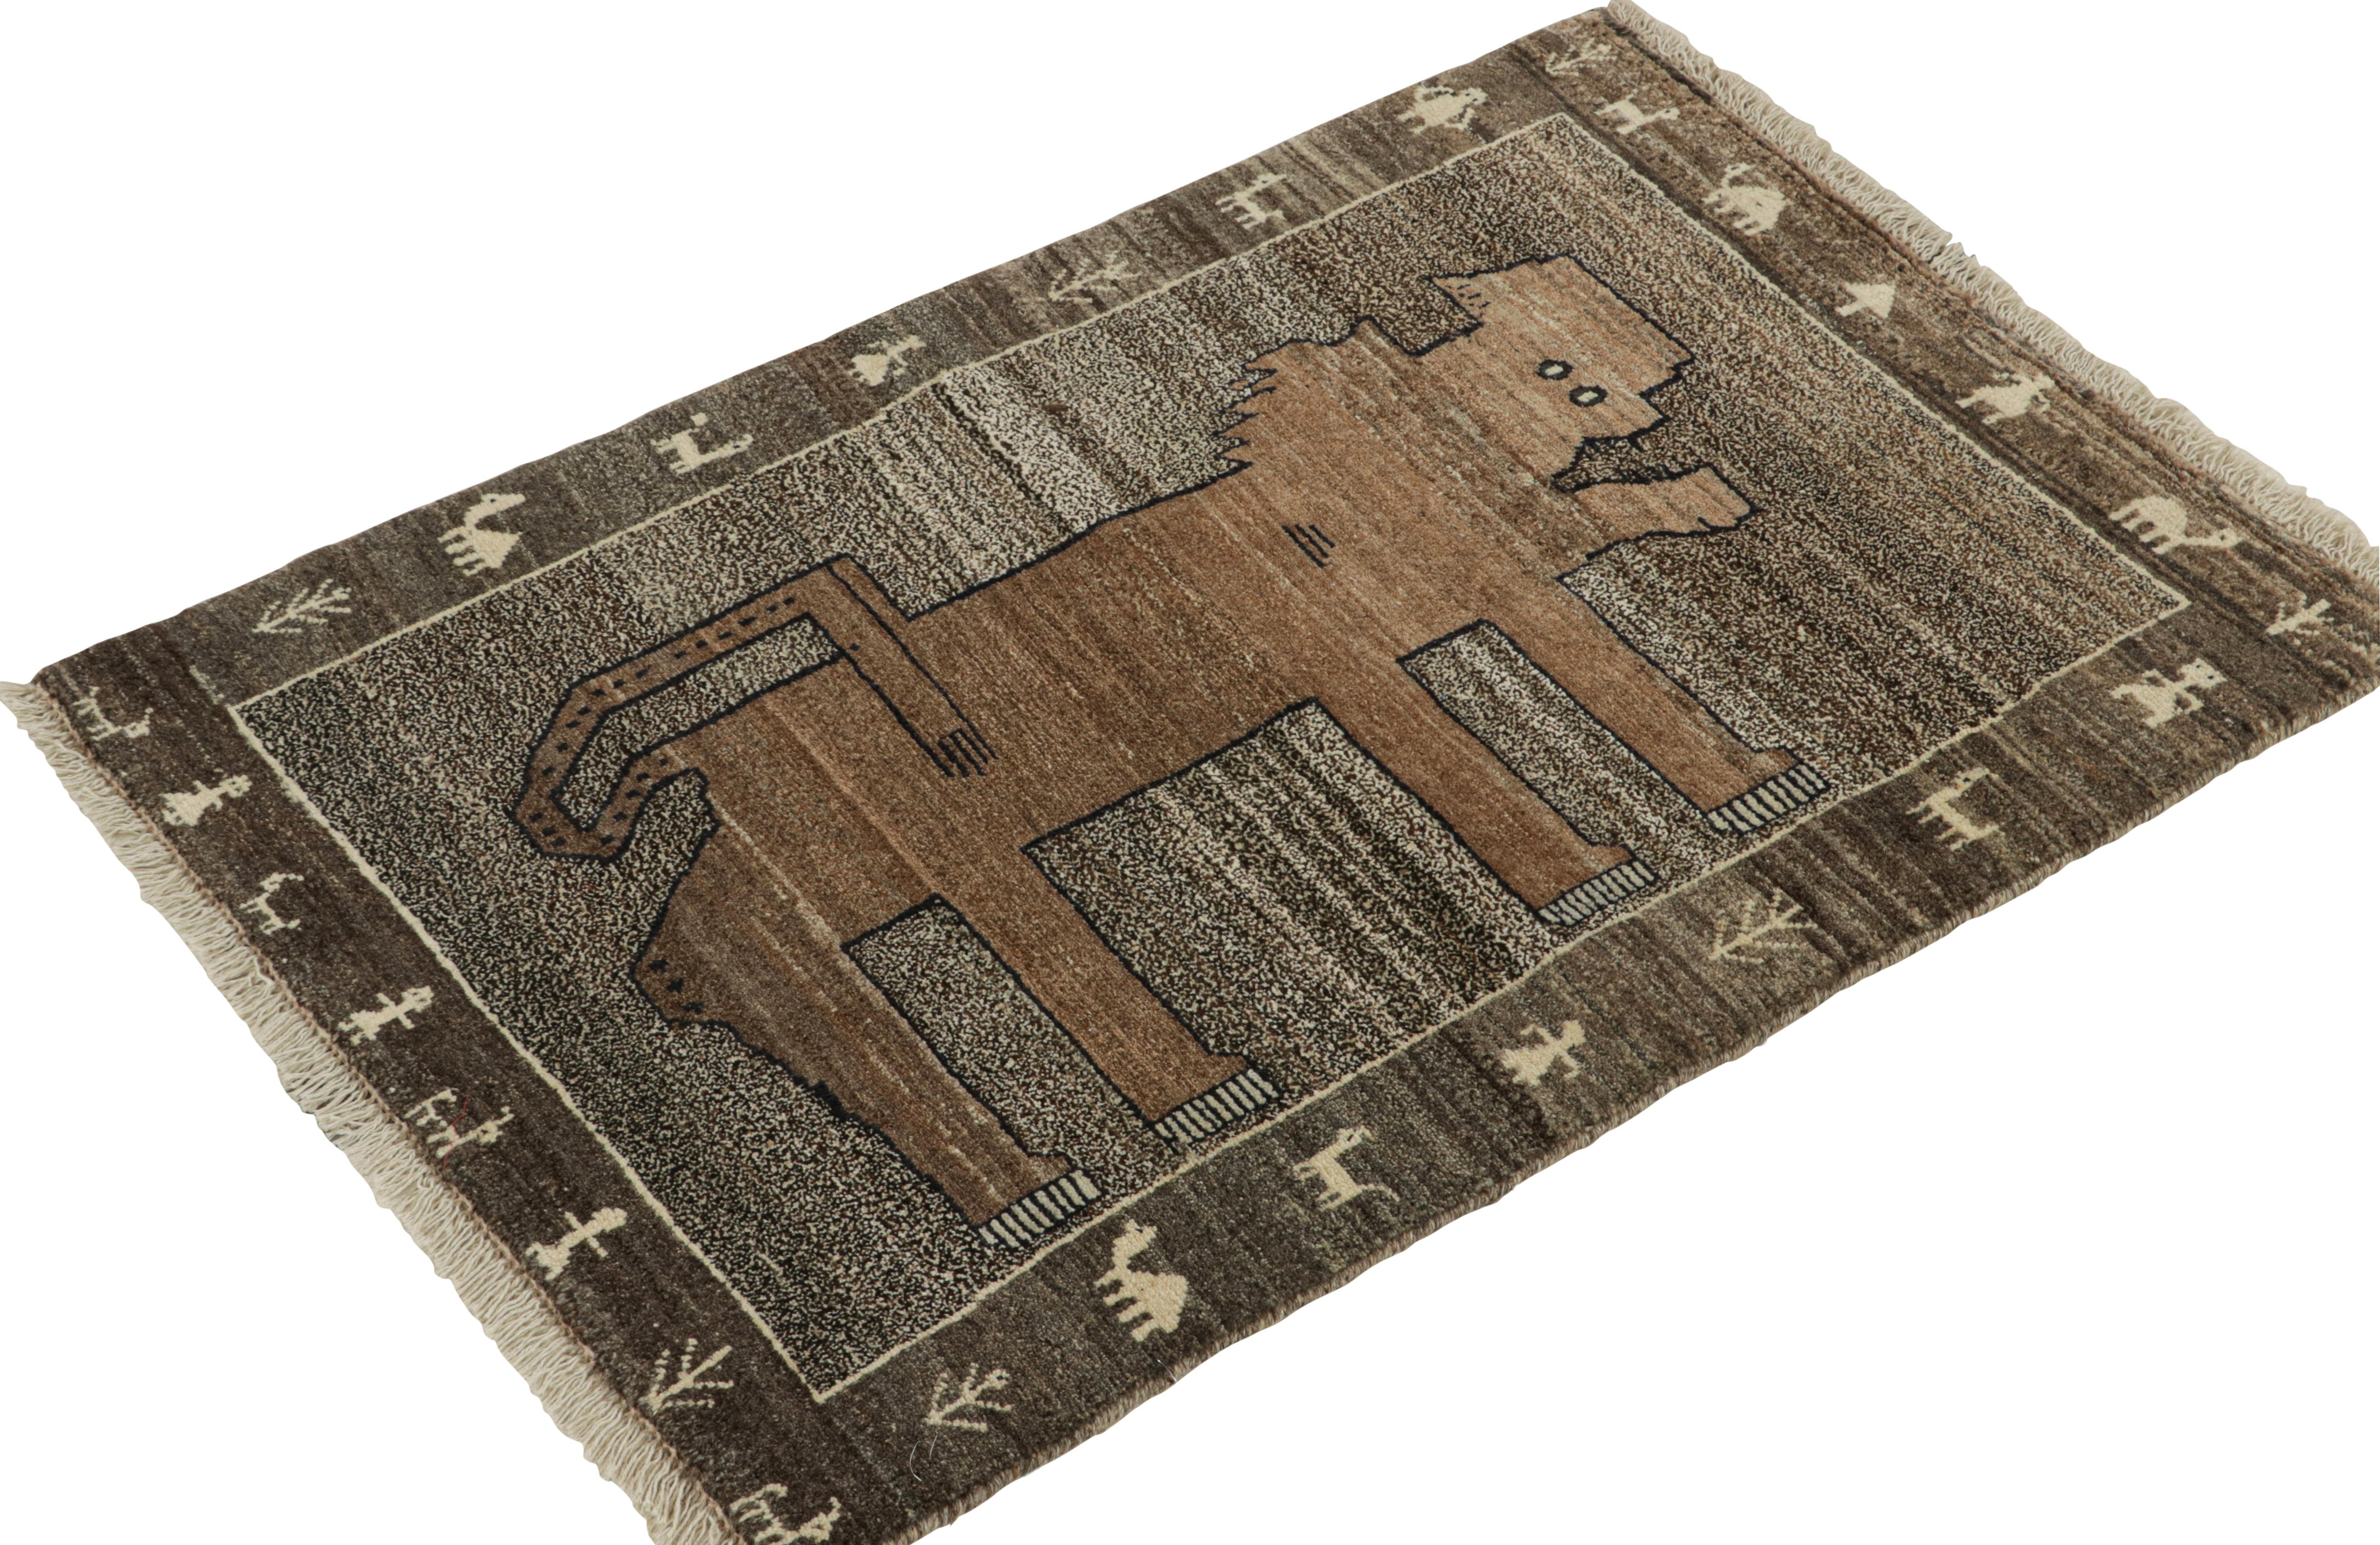 This vintage 3x5 Gabbeh Persian rug is from the latest entries in Rug & Kilim’s rare tribal curations. Hand-knotted in wool circa 1950-1960.

On the Design:

This tribal provenance is one of the most primitive, and collectible shabby-chic styles